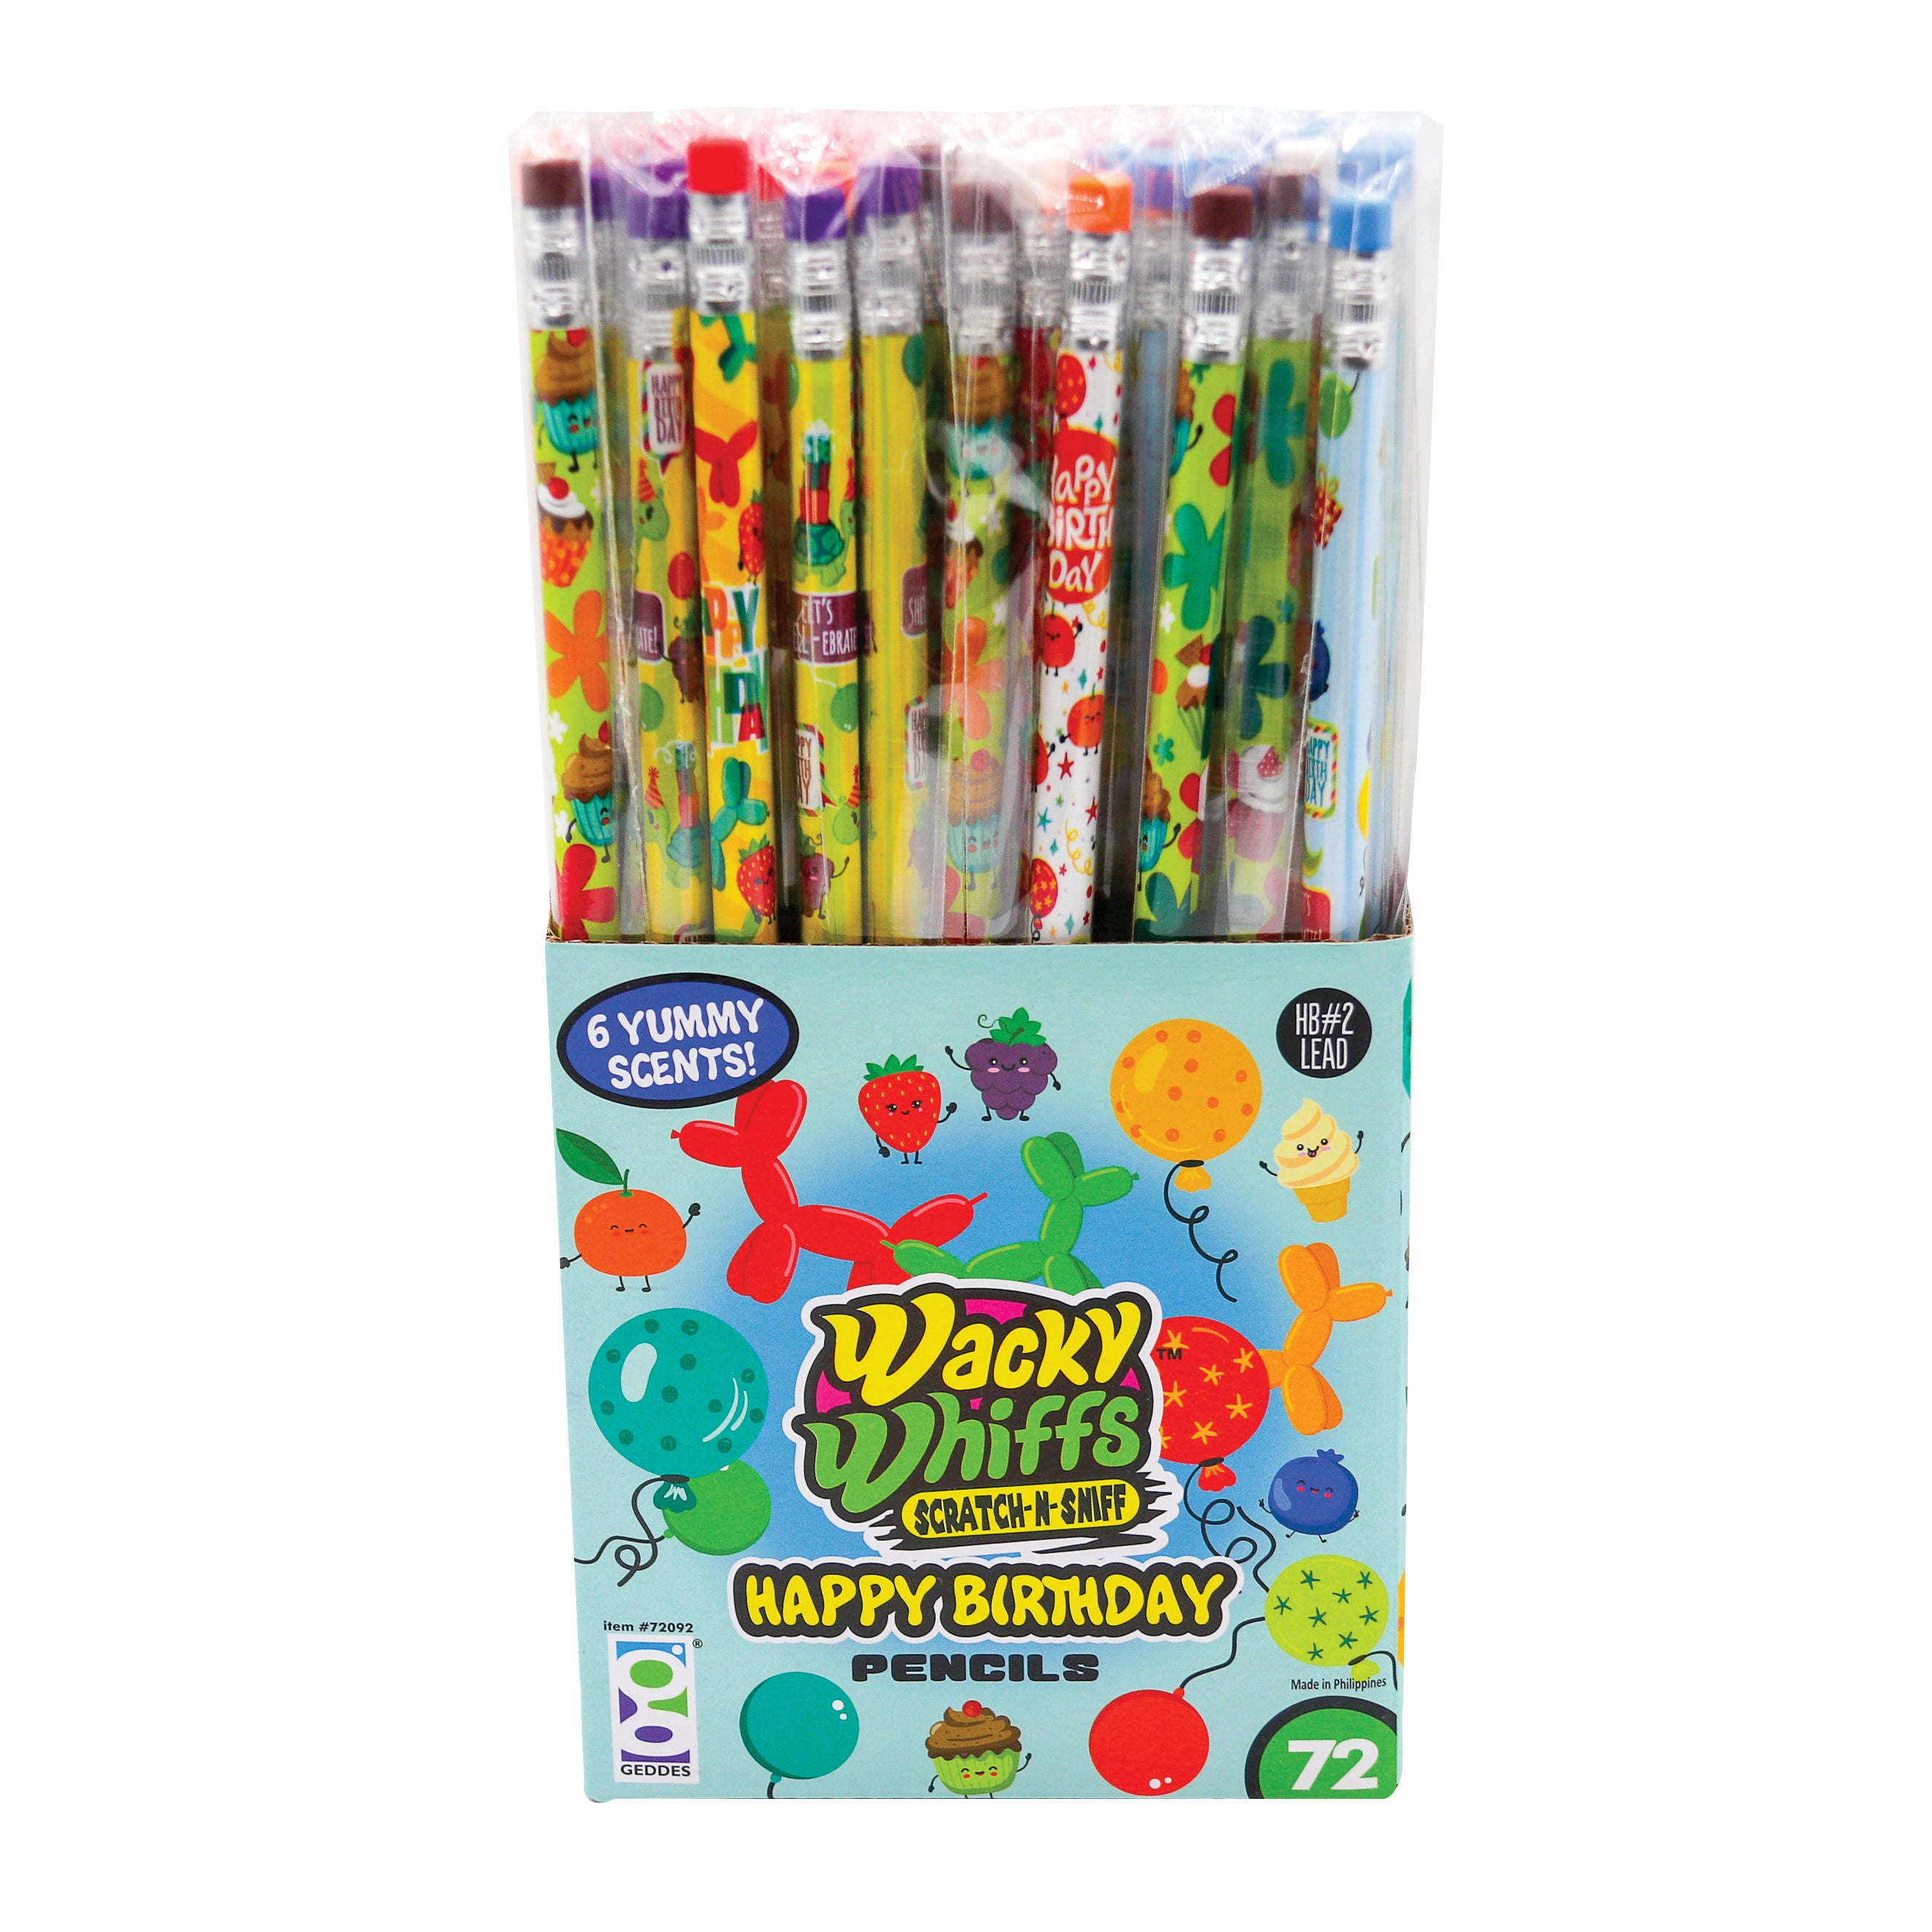 SAIWEILAI ONLINE 200 Pieces Happy Birthday Pencils Scented Pencils 10 style  Smelly Pencils Birthday Pencils with Fruit Elements for Teachers